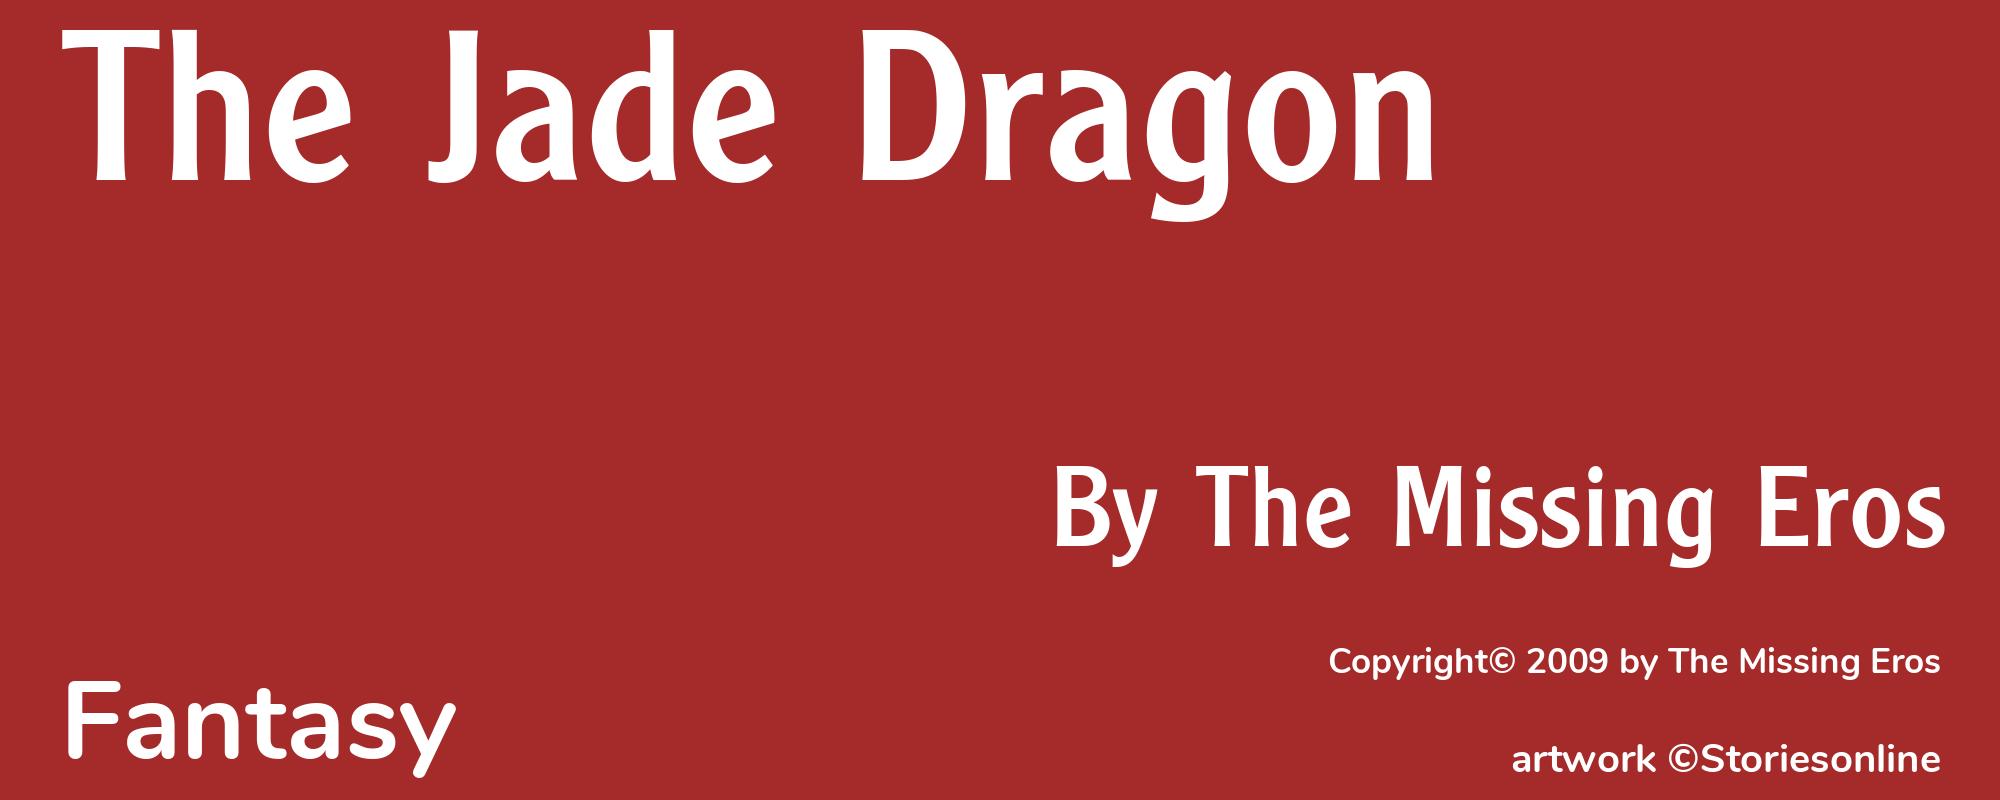 The Jade Dragon - Cover